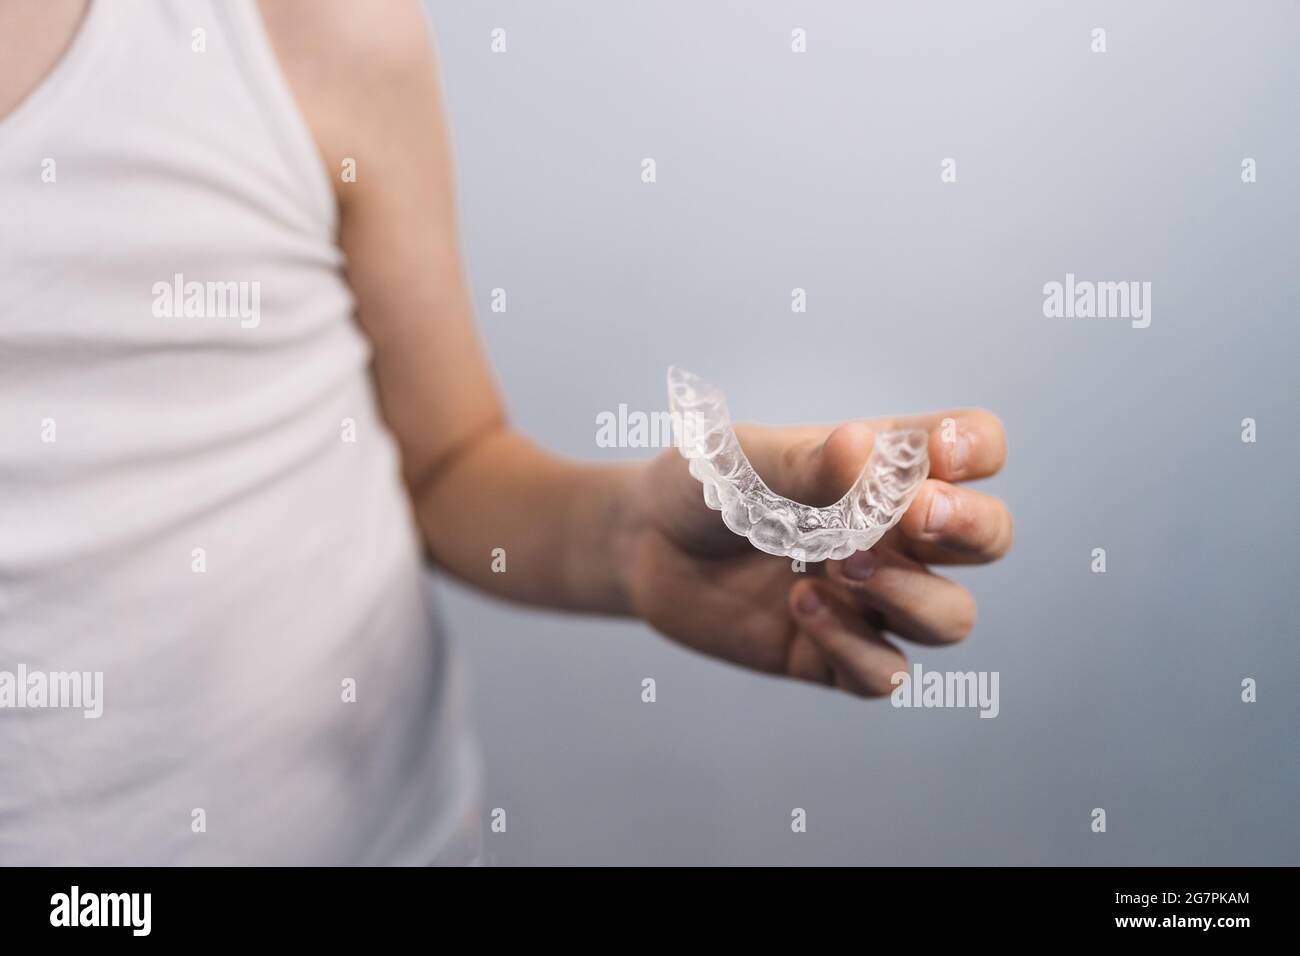 Male caucasian kid with sleeveless shirt holding a mouthguard Stock Photo